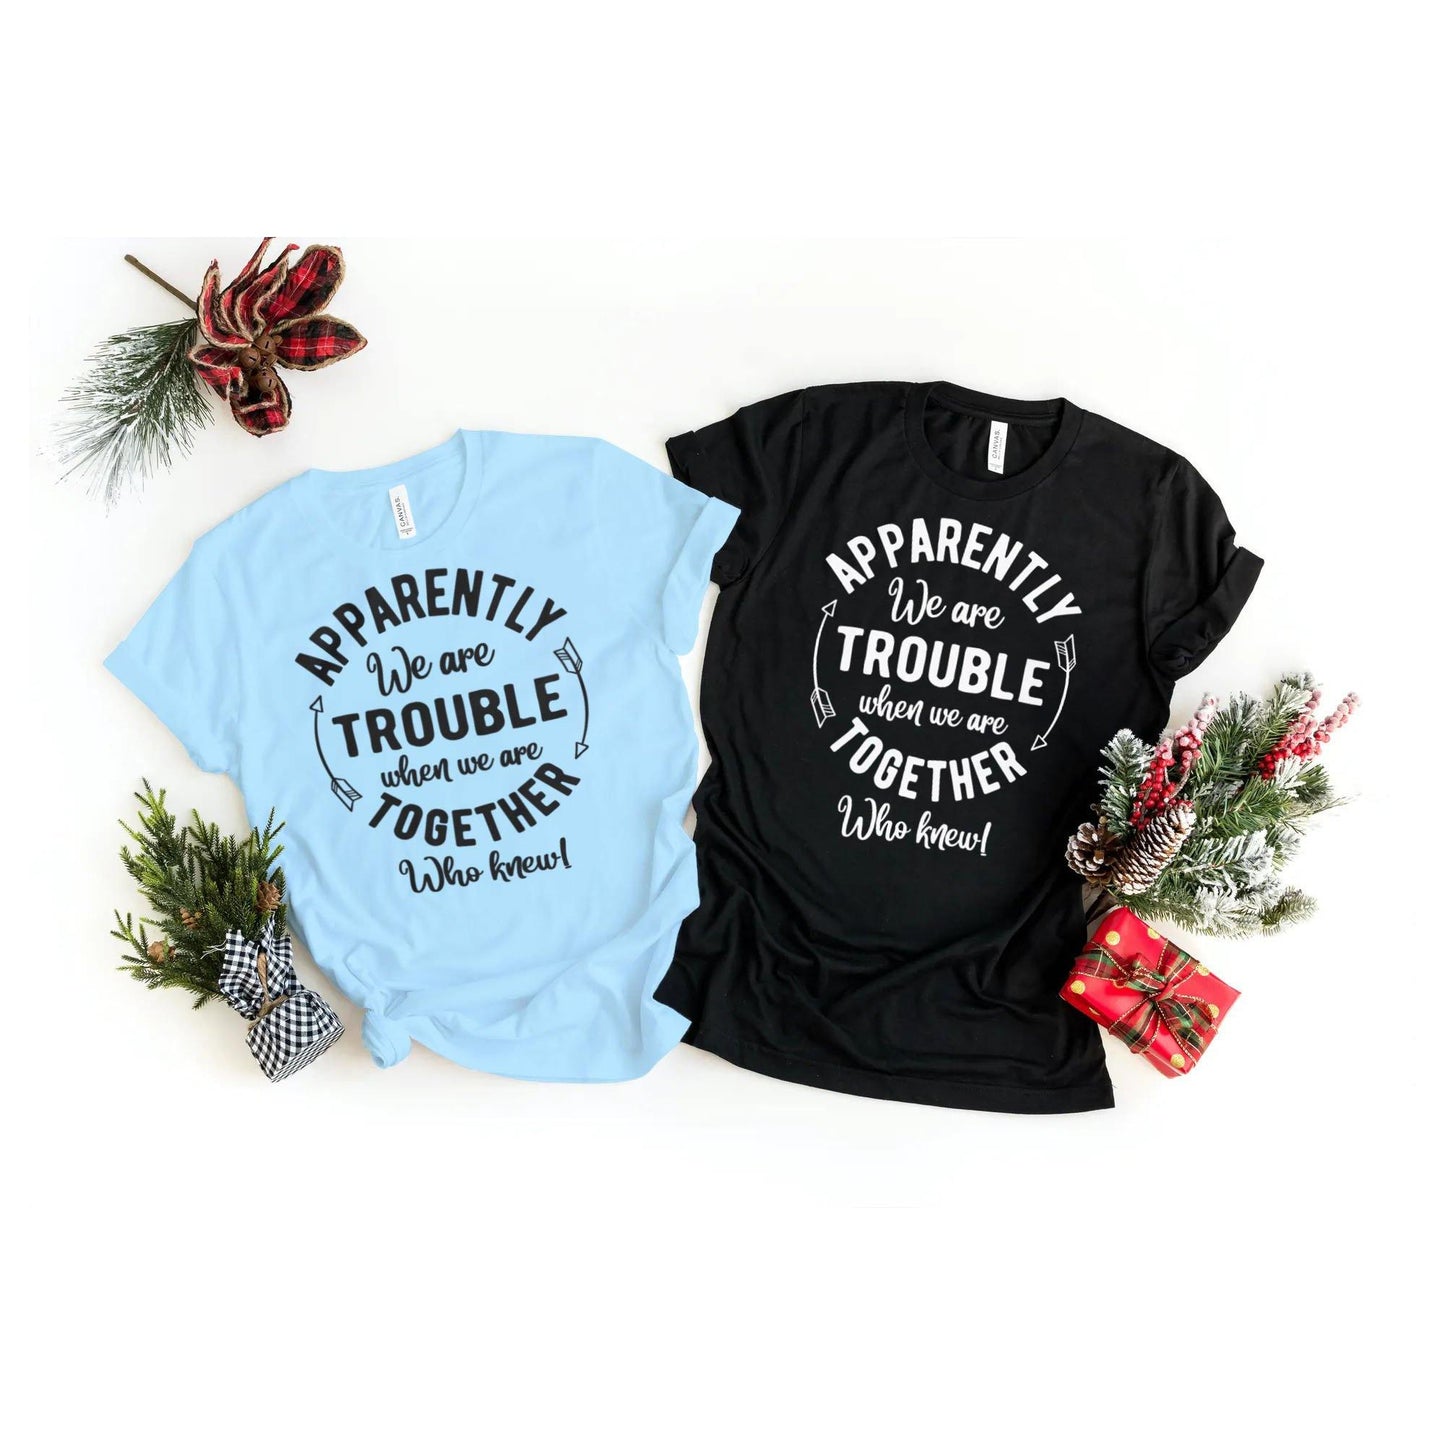 Apparently We are Trouble Together - T-Shirt - Healthy Wealthy Skinny